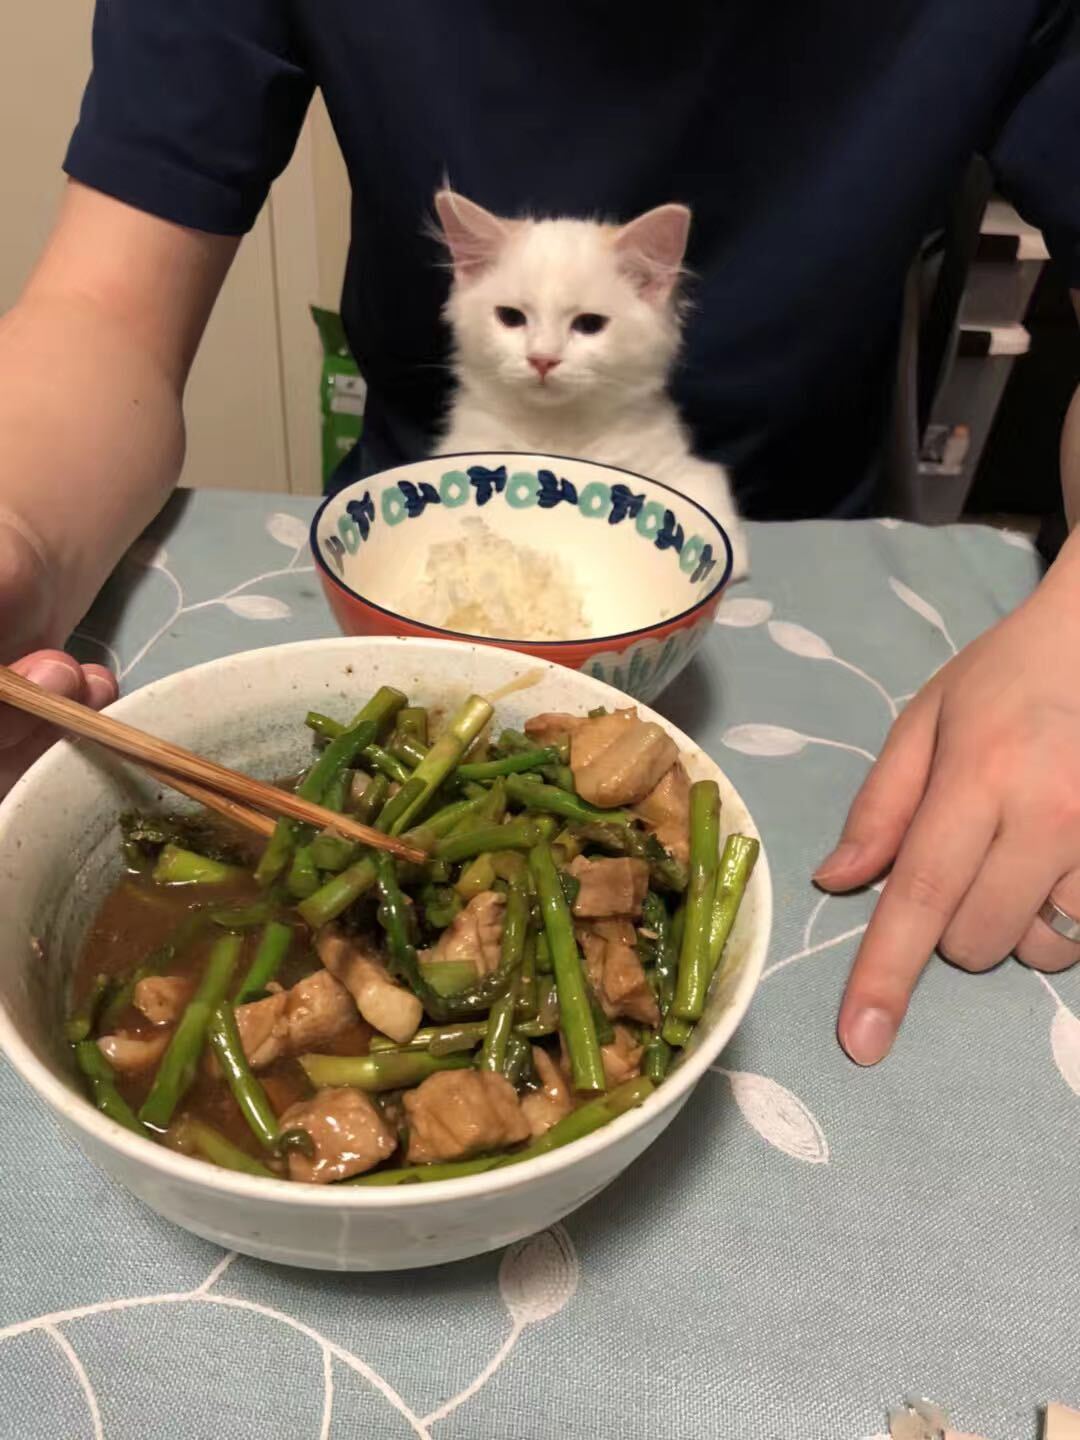 Confused cat gazing at human food Blank Meme Template